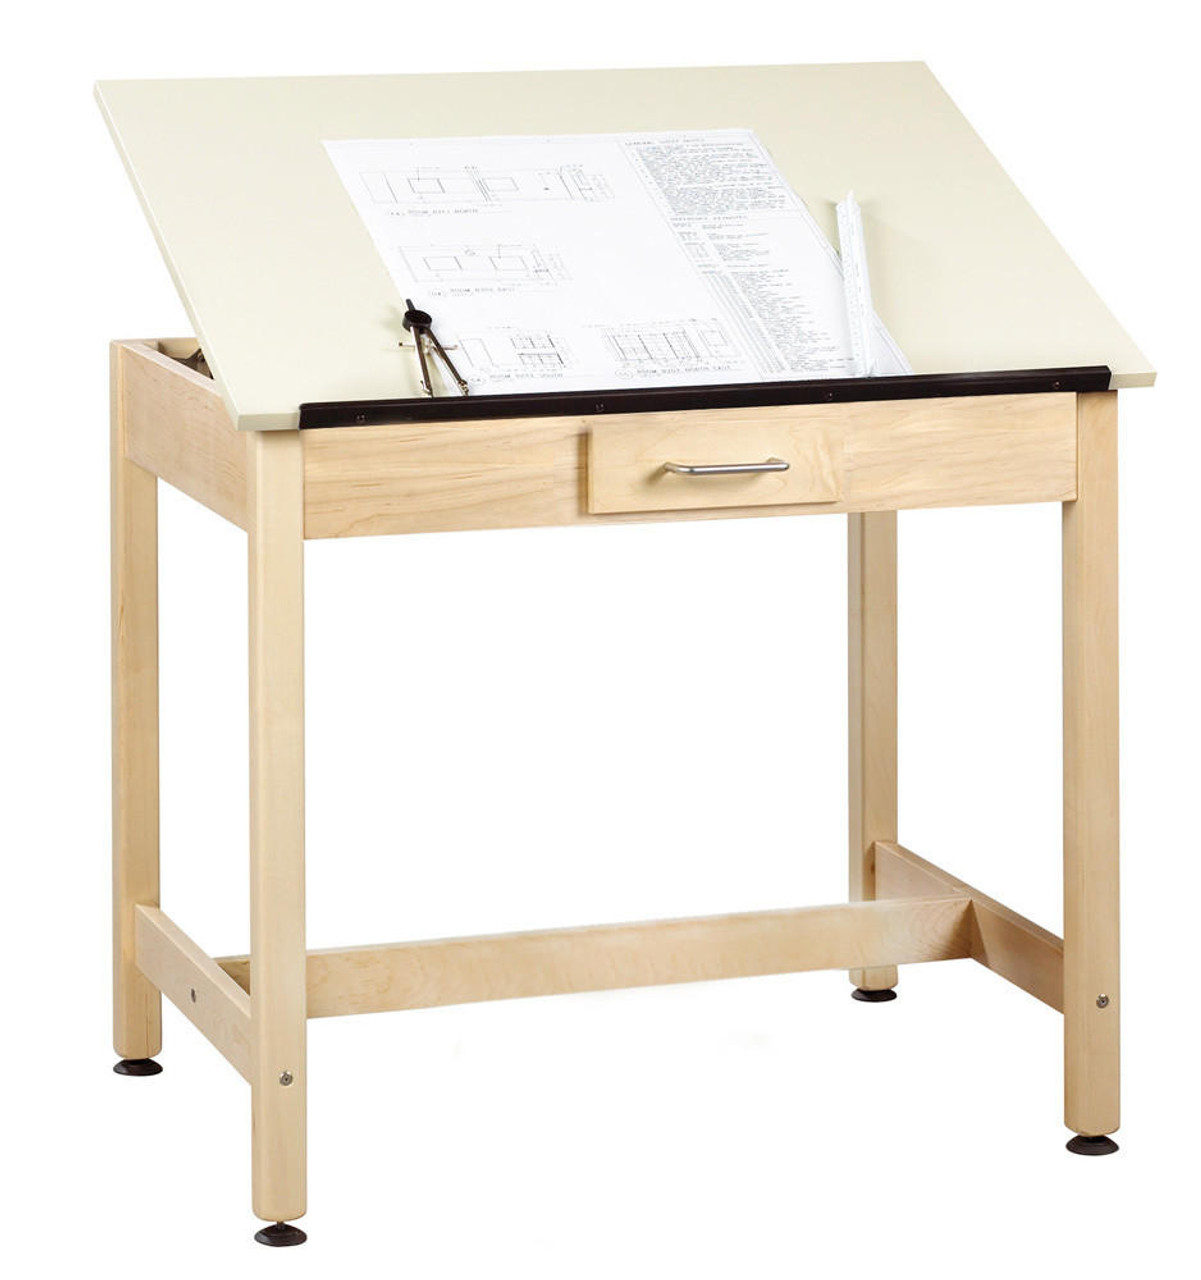 DIVERSIFIED WOODCRAFTS Art/Drafting Table - 36x24x30-1/4 - 6 drawer-17  Wt-150